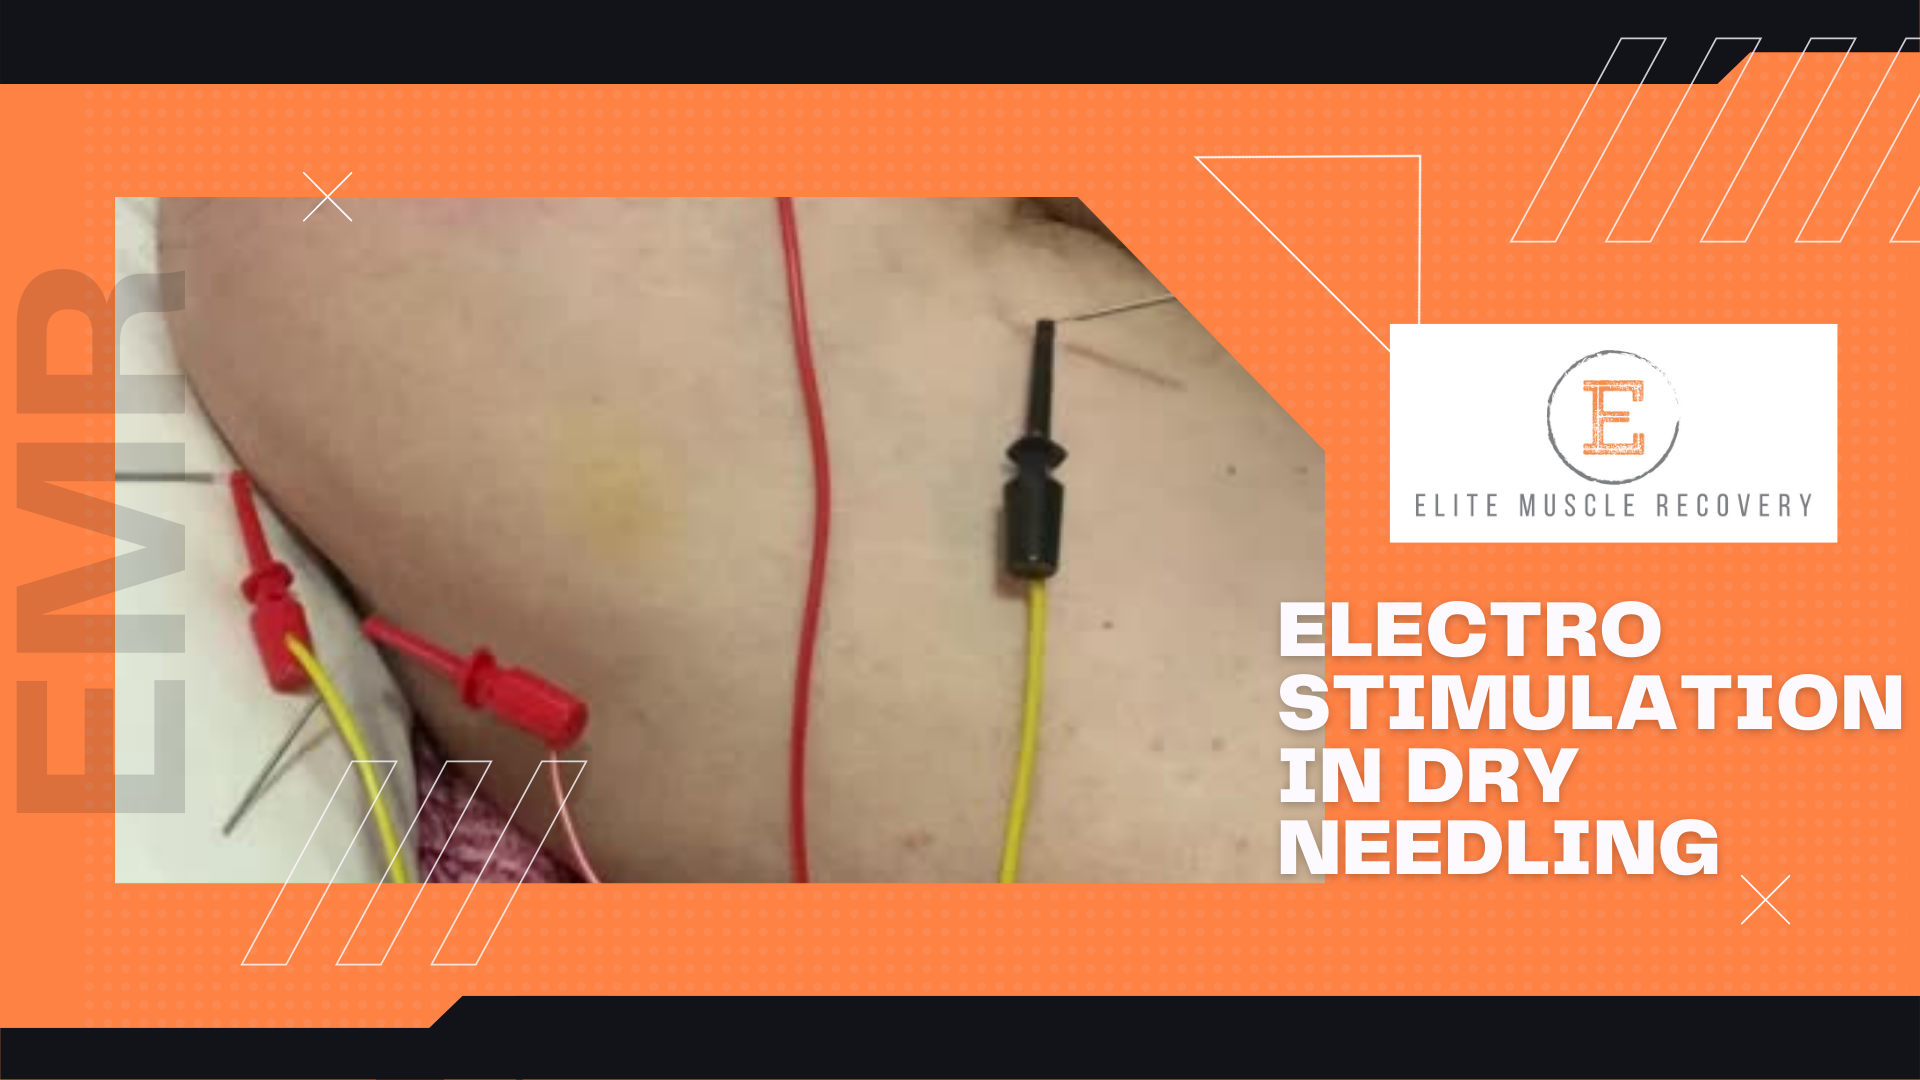 Introducing Electo Stimulation with Dry Needling to kick start your healing